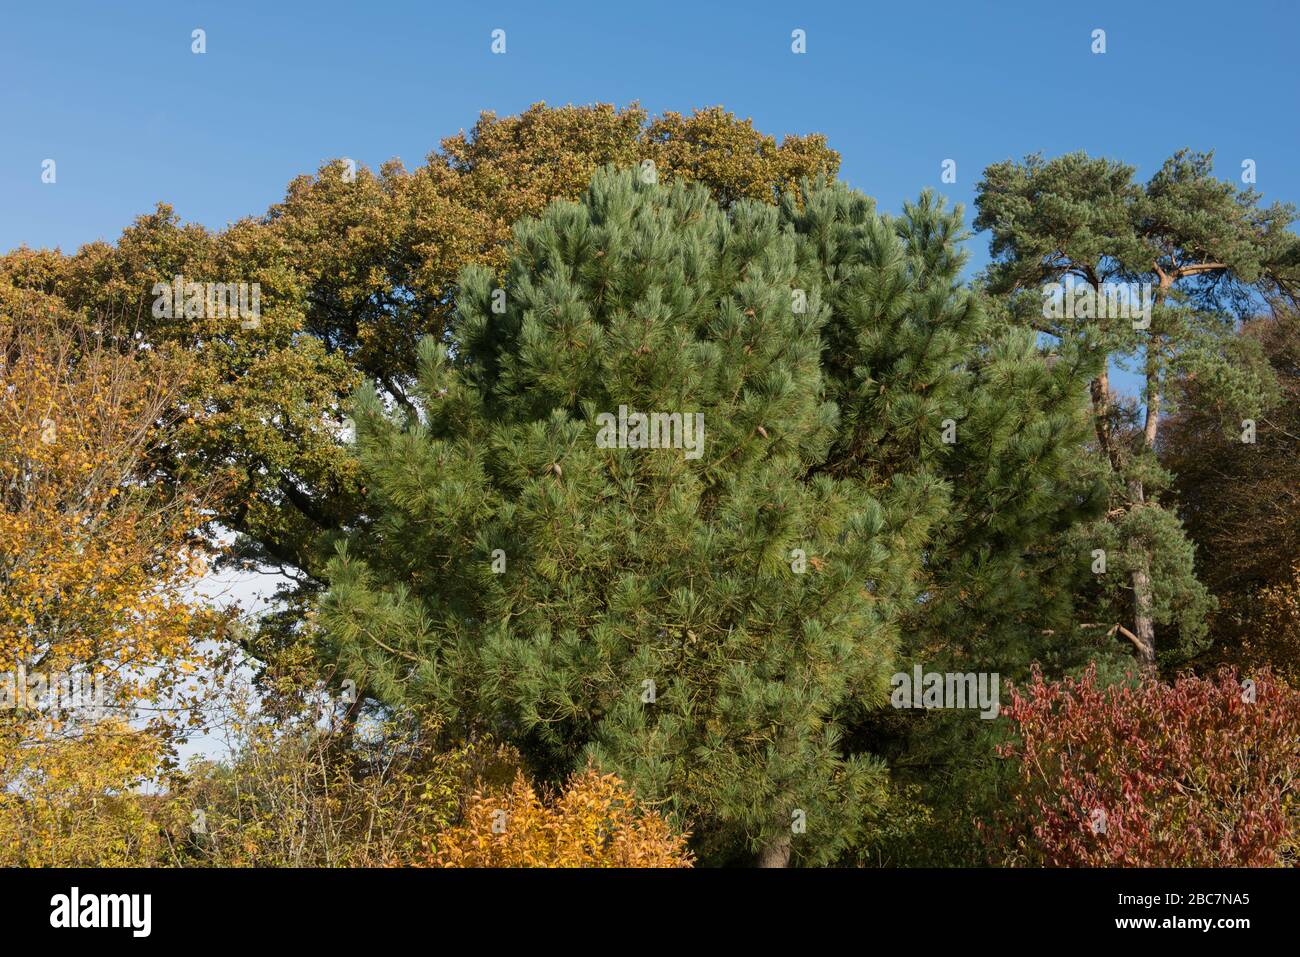 Green Foliage of the Evergreen Maritime or Cluster Pine Tree (Pinus pinaster) with a Bright Blue Sky Background in a Woodland Garden Stock Photo